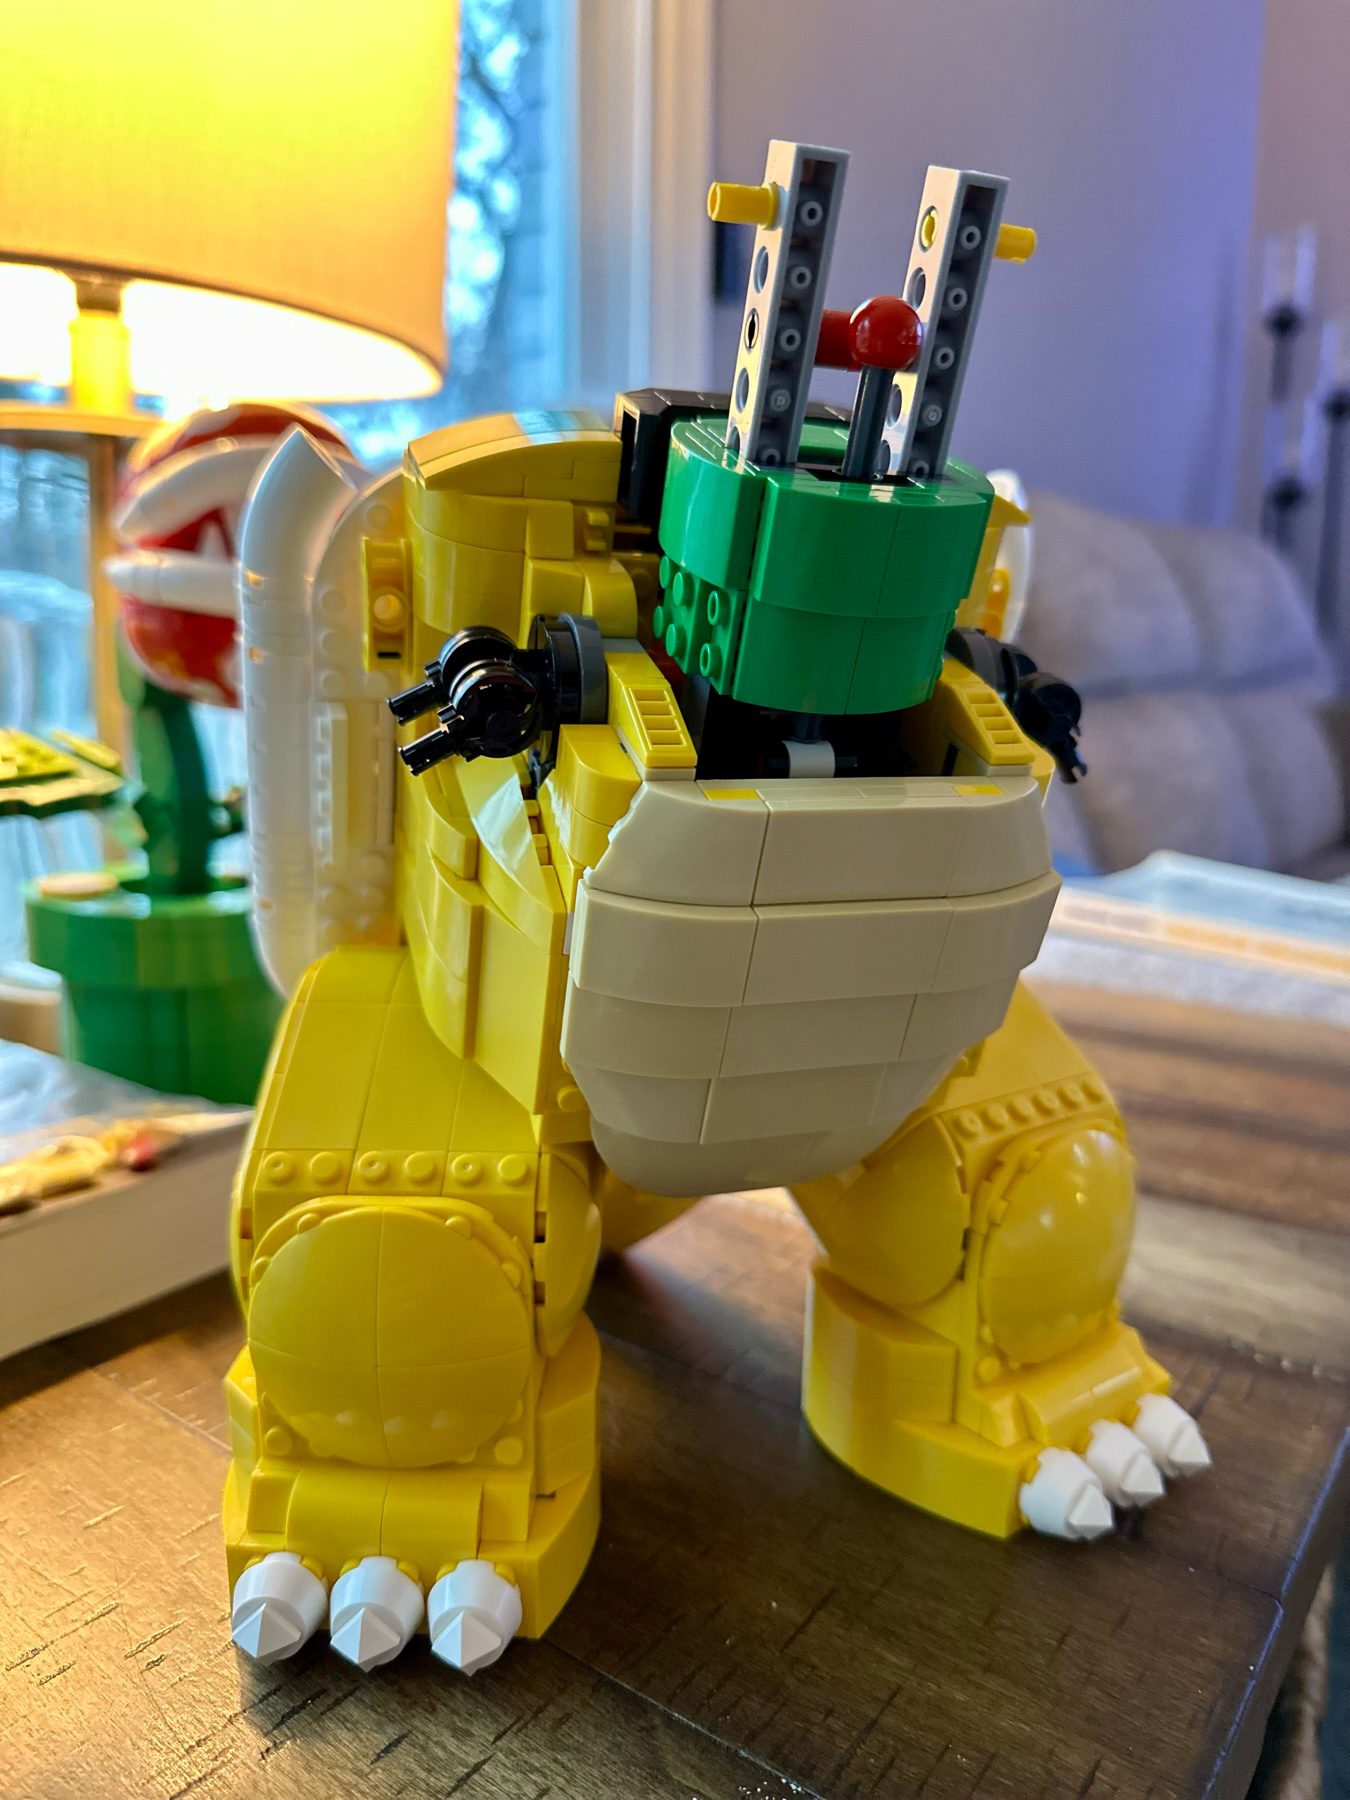 A LEGO model of a dinosaur-like creature with a green and yellow color scheme, featuring a round body, short stubby arms, and a cockpit containing two control handles and a red button. The creature stands on a wooden surface with part of a home